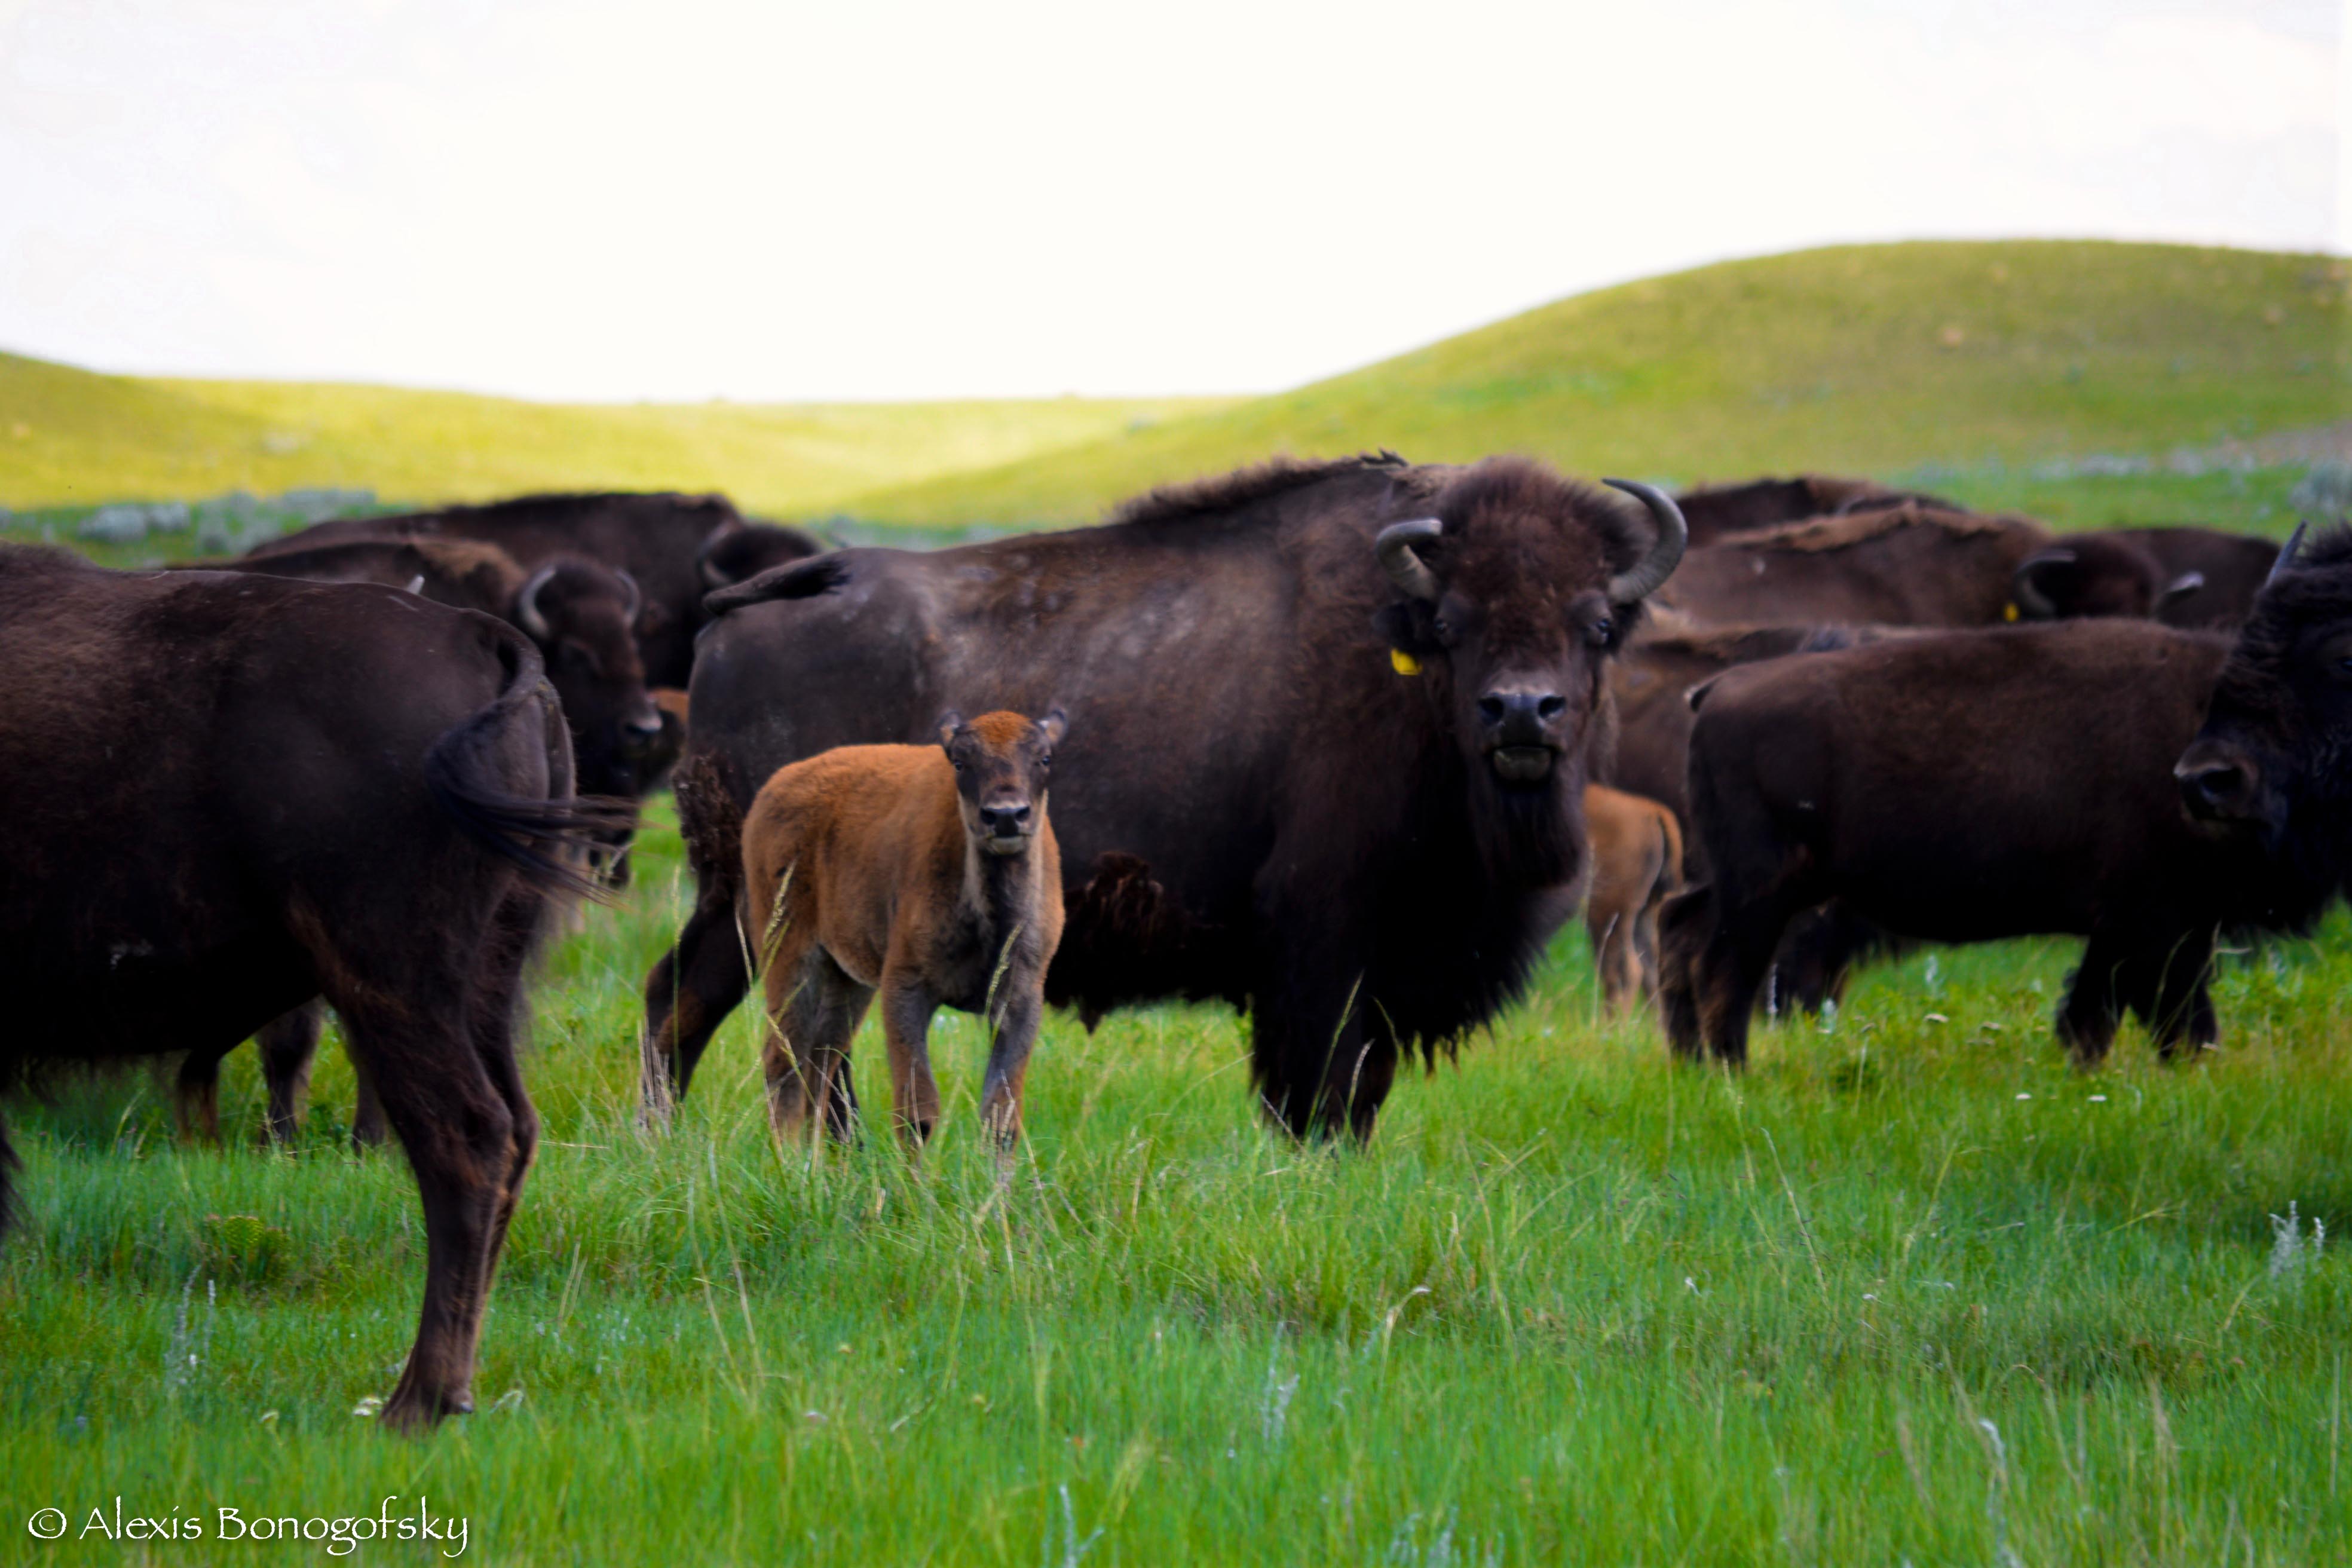 Yellowstone Bison on Fort Peck Reservation 2013. Copyright Alexis Bonogofsky.